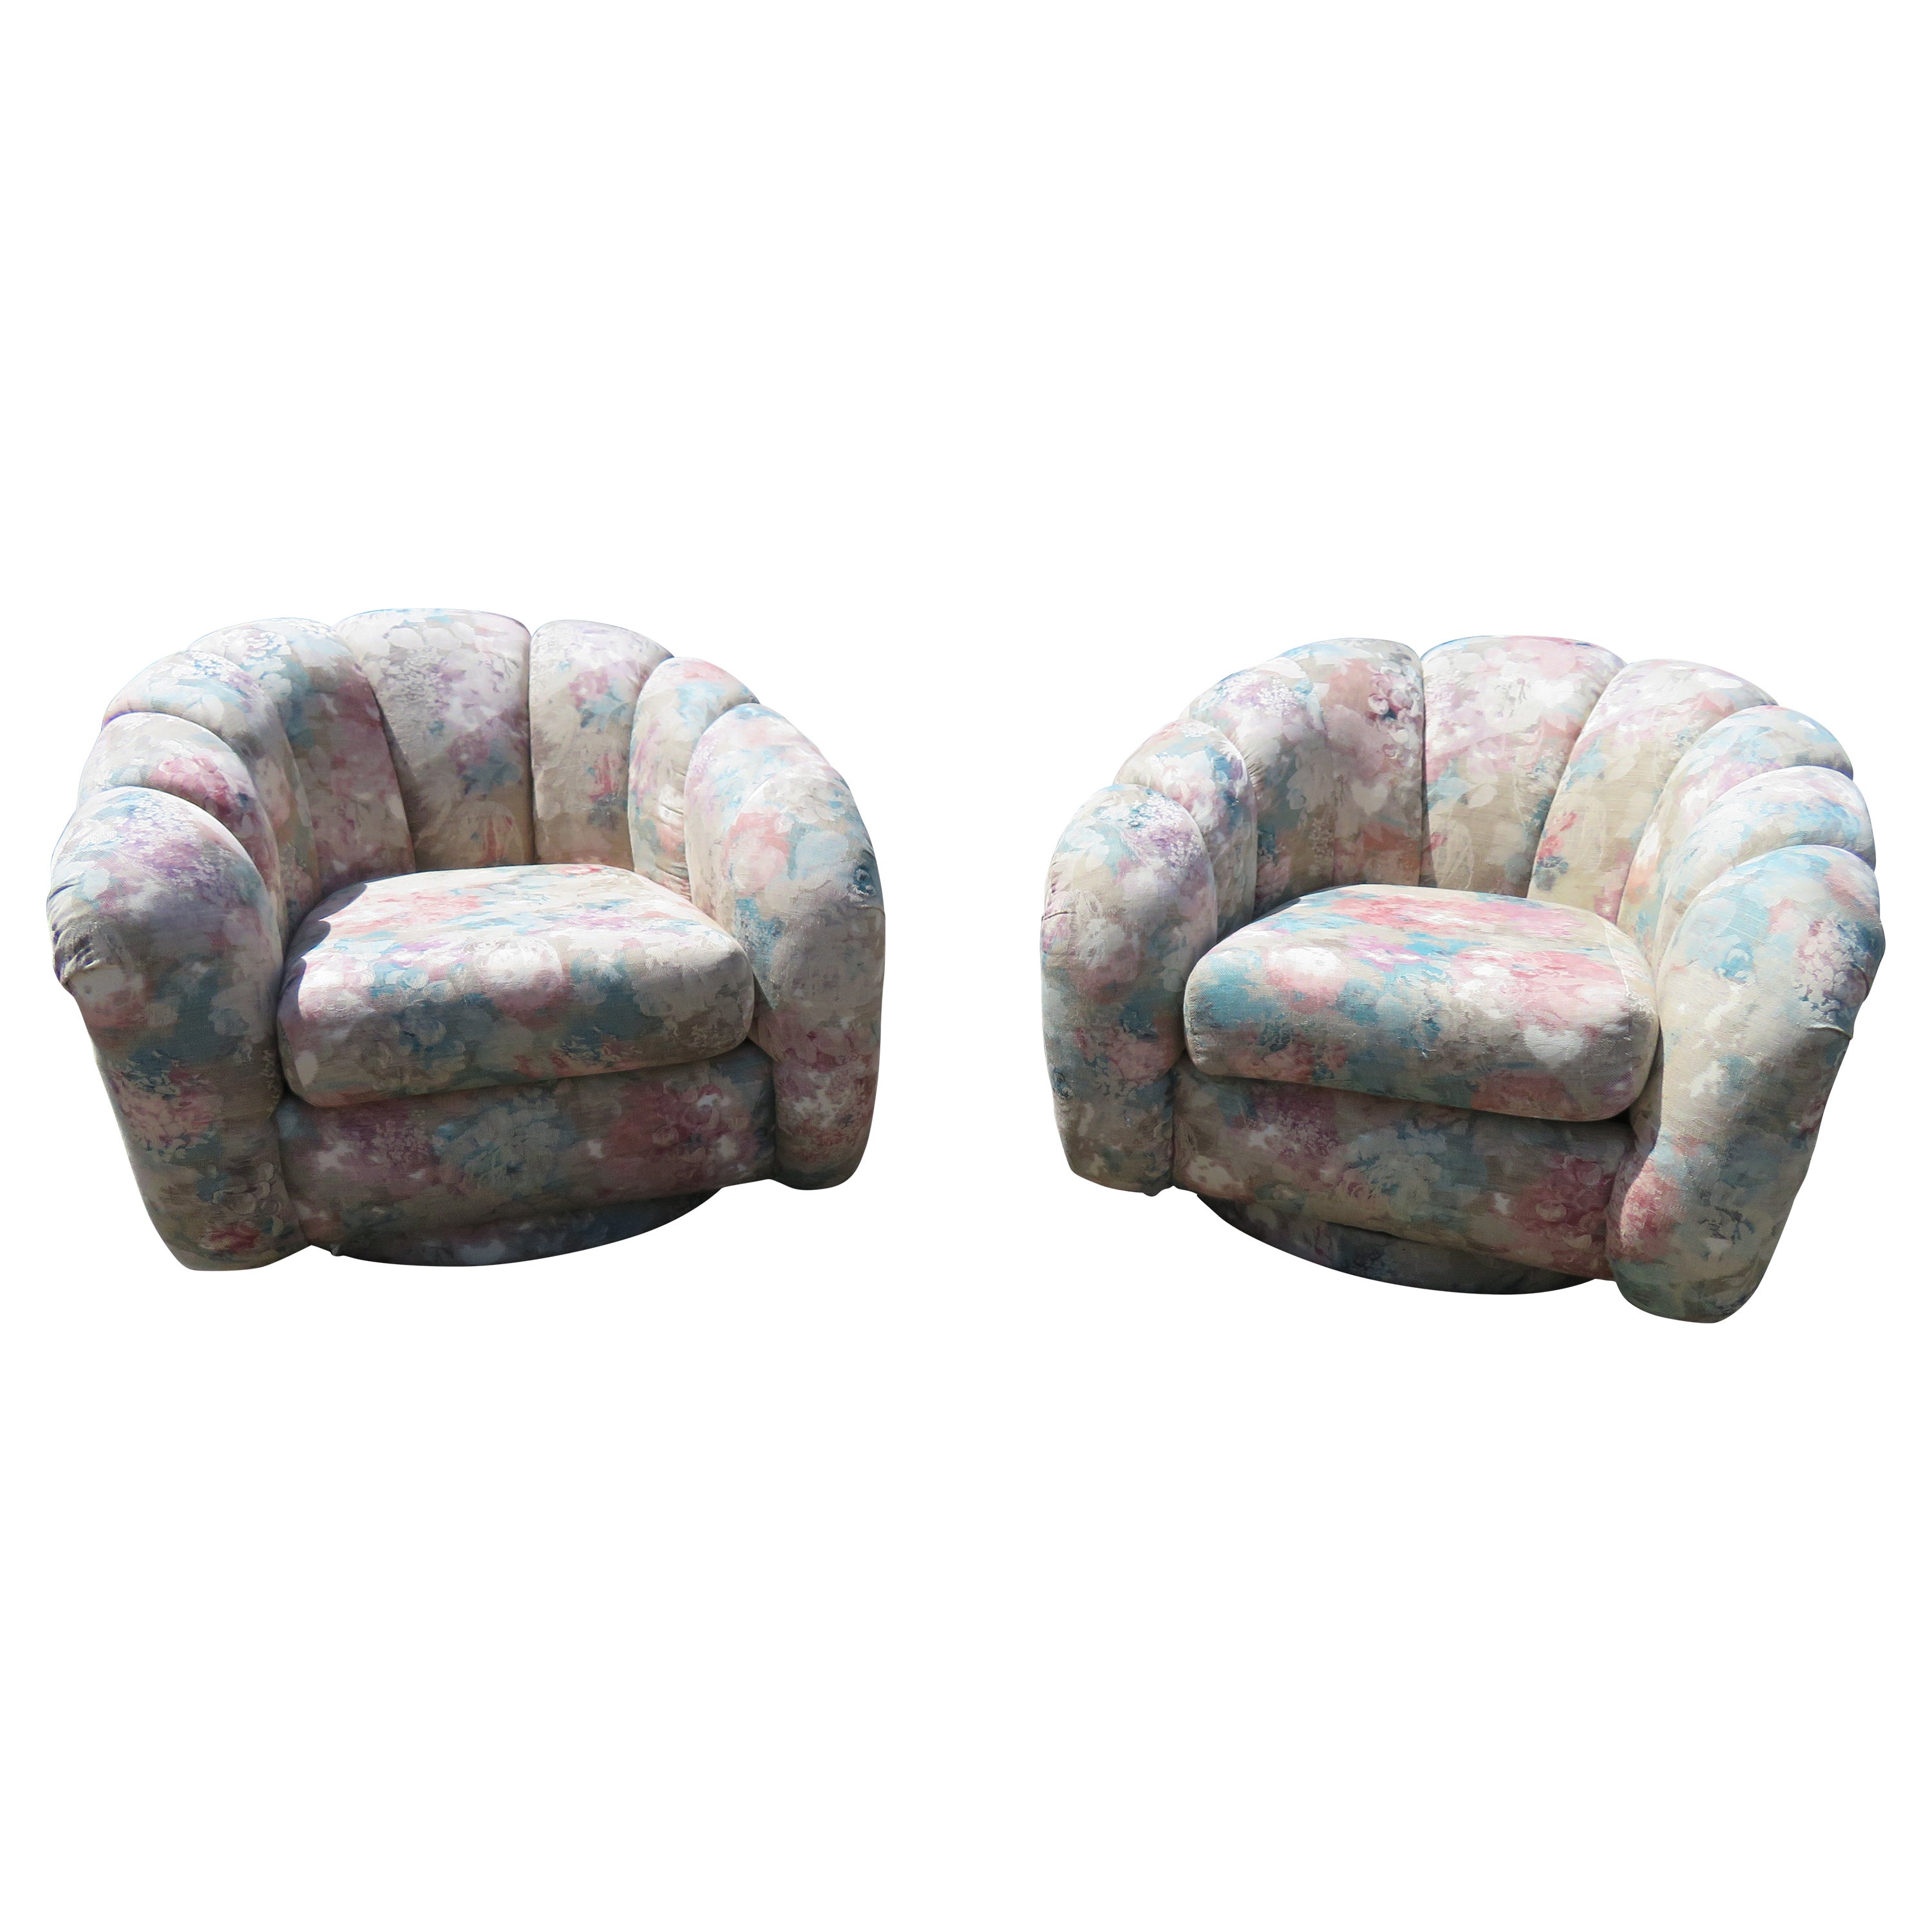 Lovely Pair of Directional Croissant Swivel Lounge Chair Mid-Century